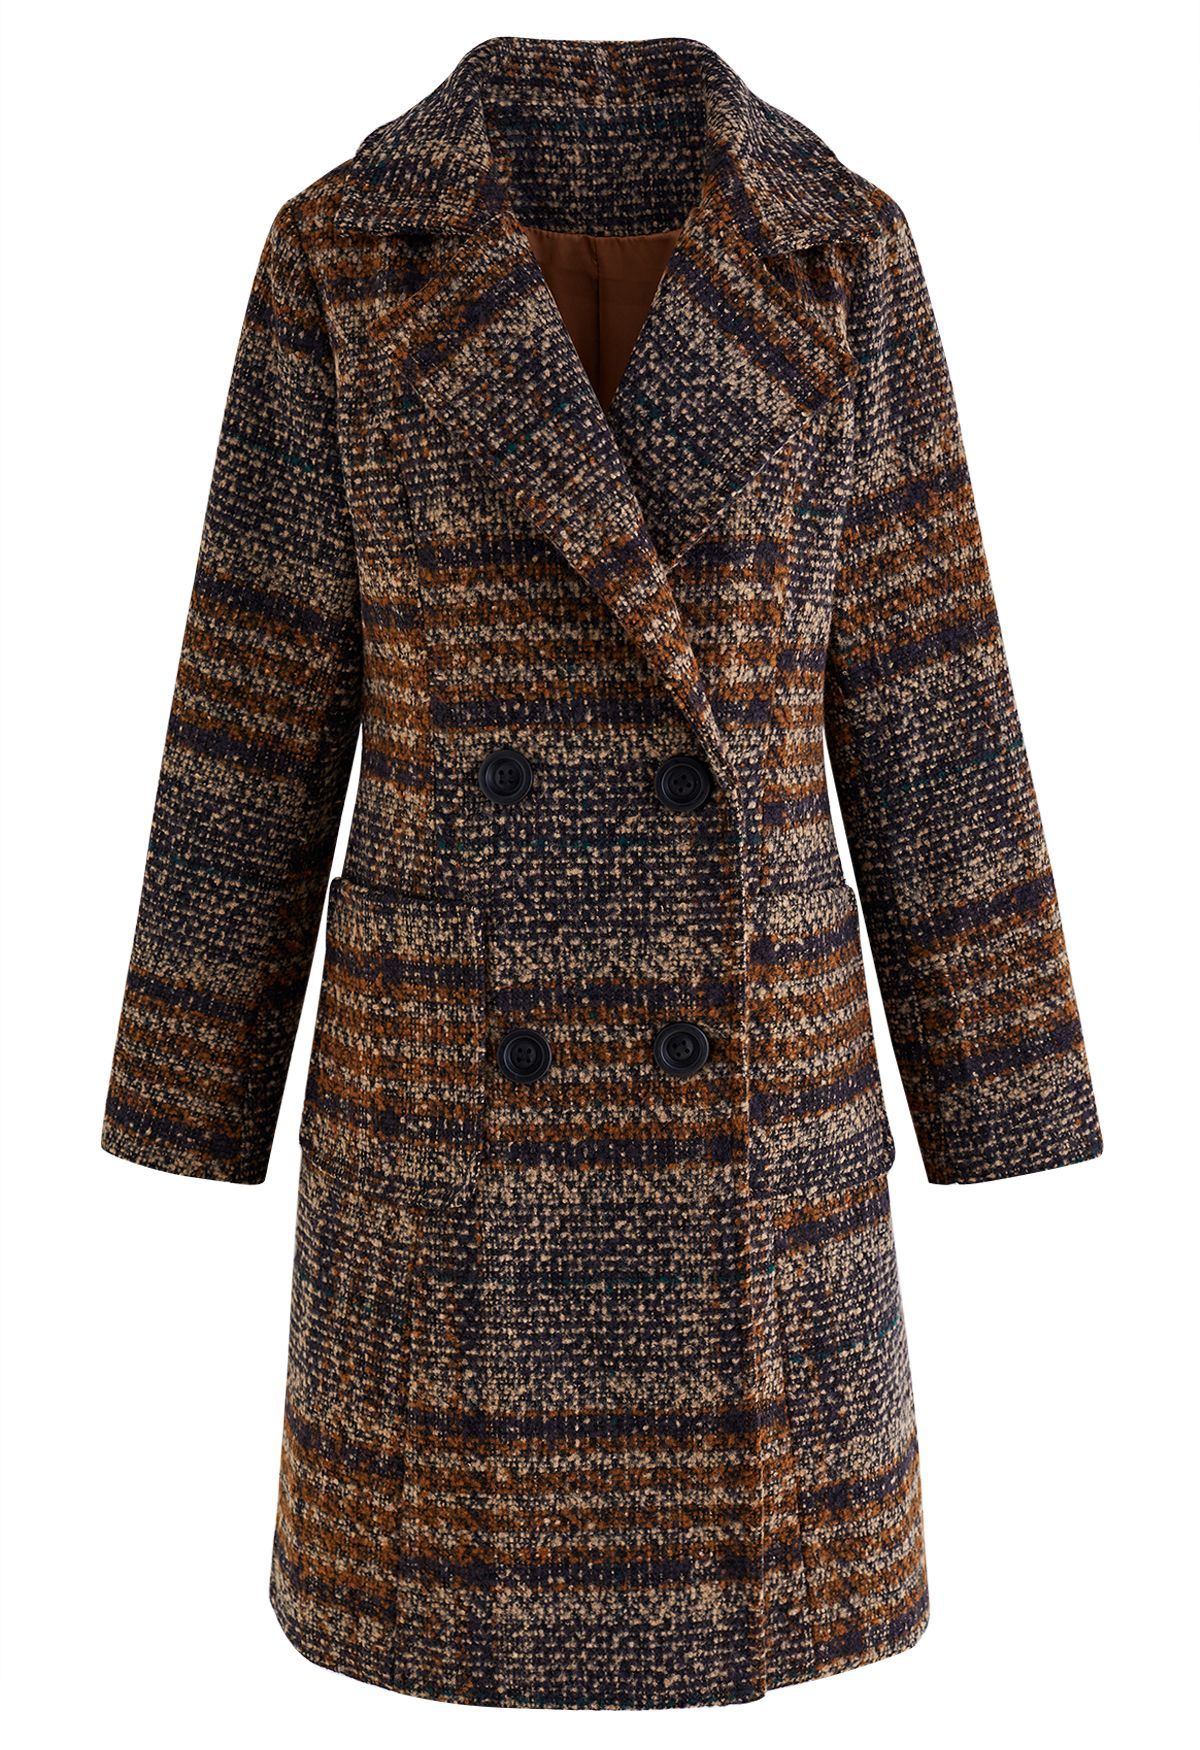 Retro Plaid Double-Breasted Wool-Blend Coat in Brown | Chicwish